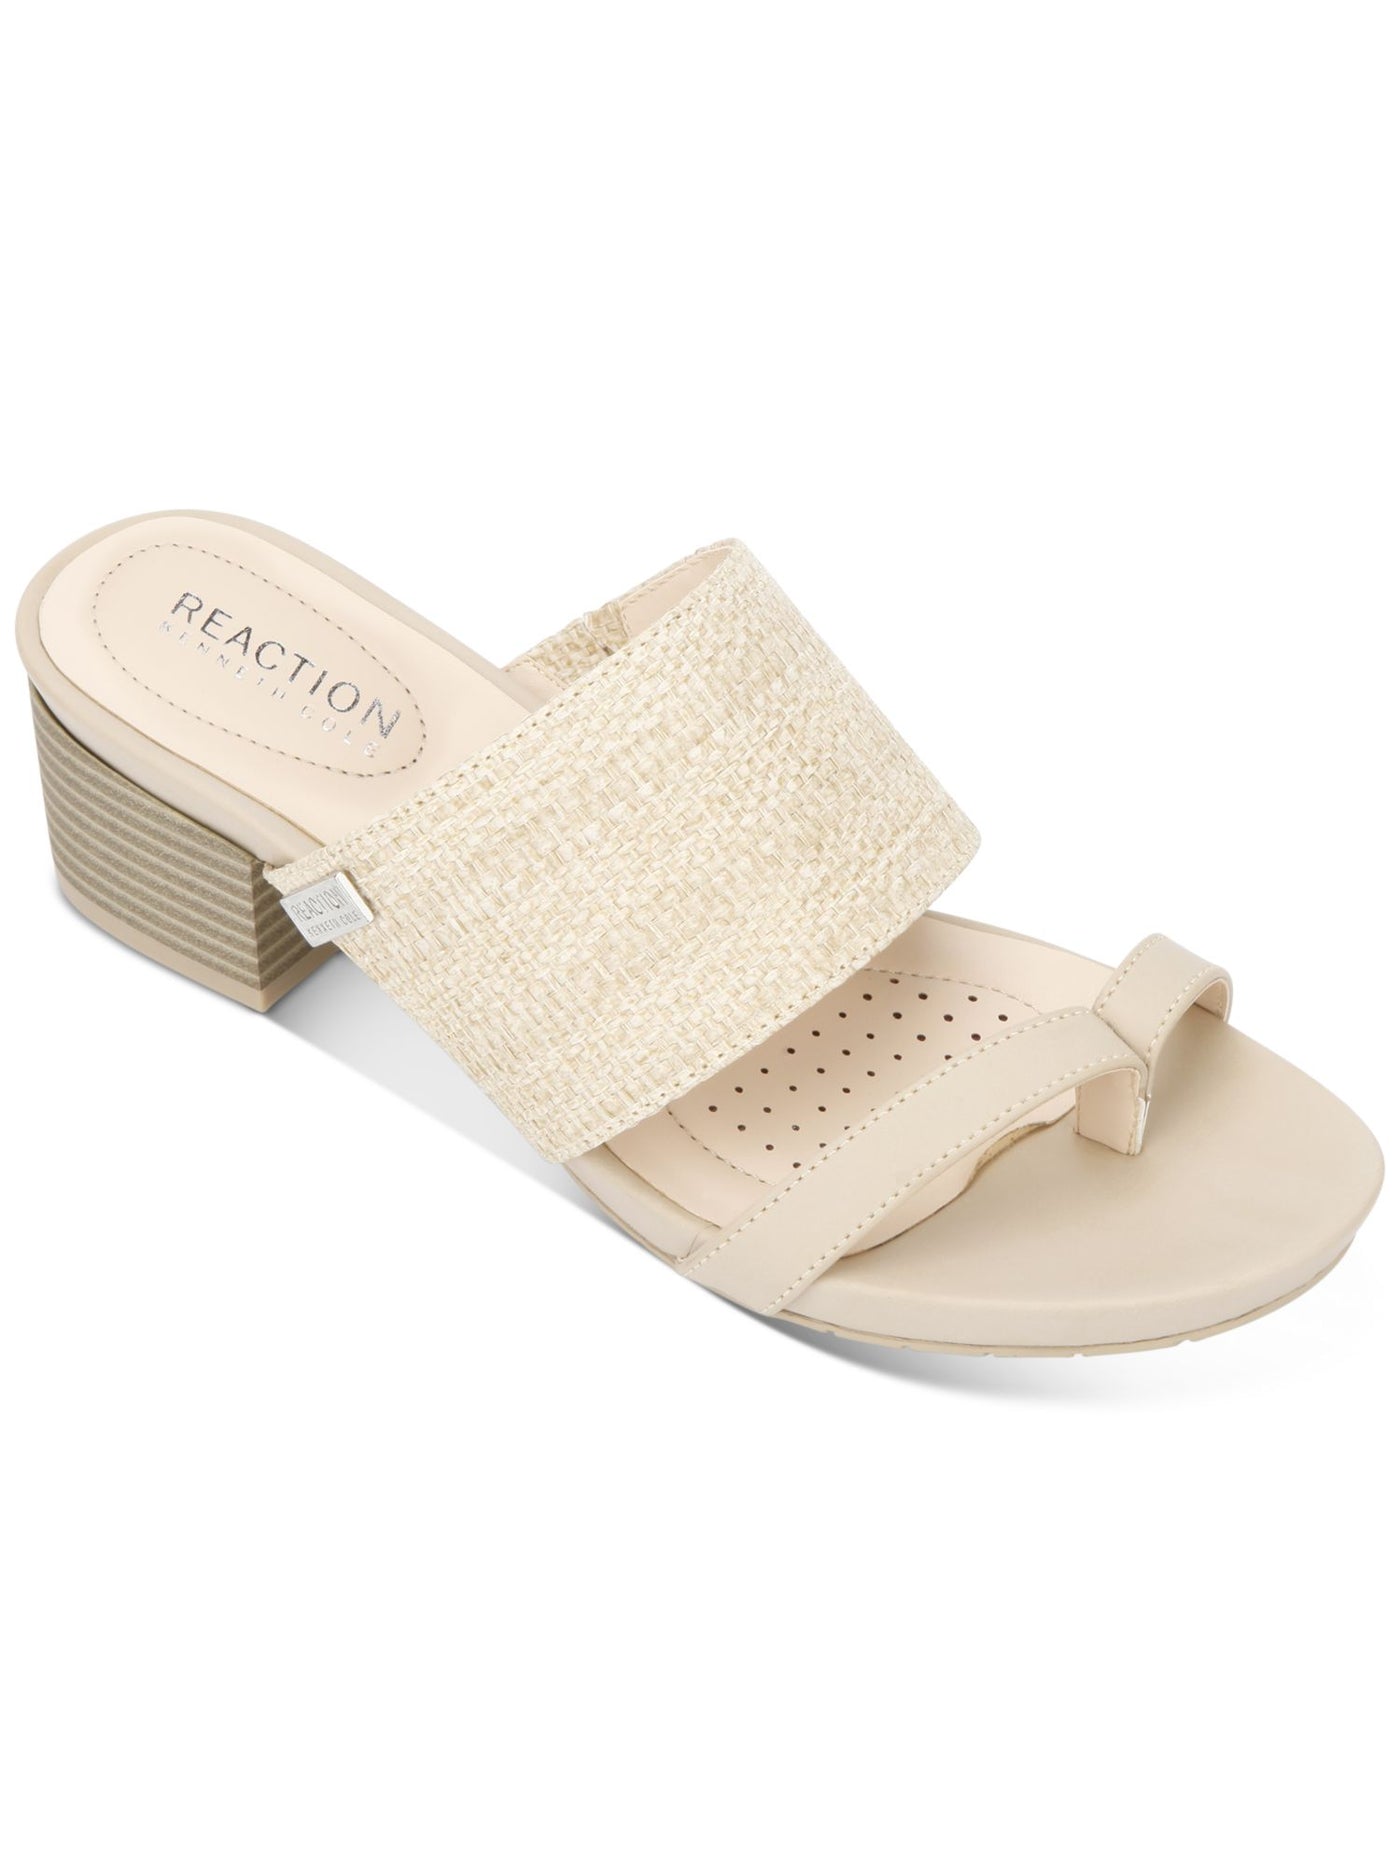 KENNETH COLE Womens Beige Woven Toe Loop Cushioned Logo Late Mule Round Toe Block Heel Slip On Thong Sandals Shoes 7 M